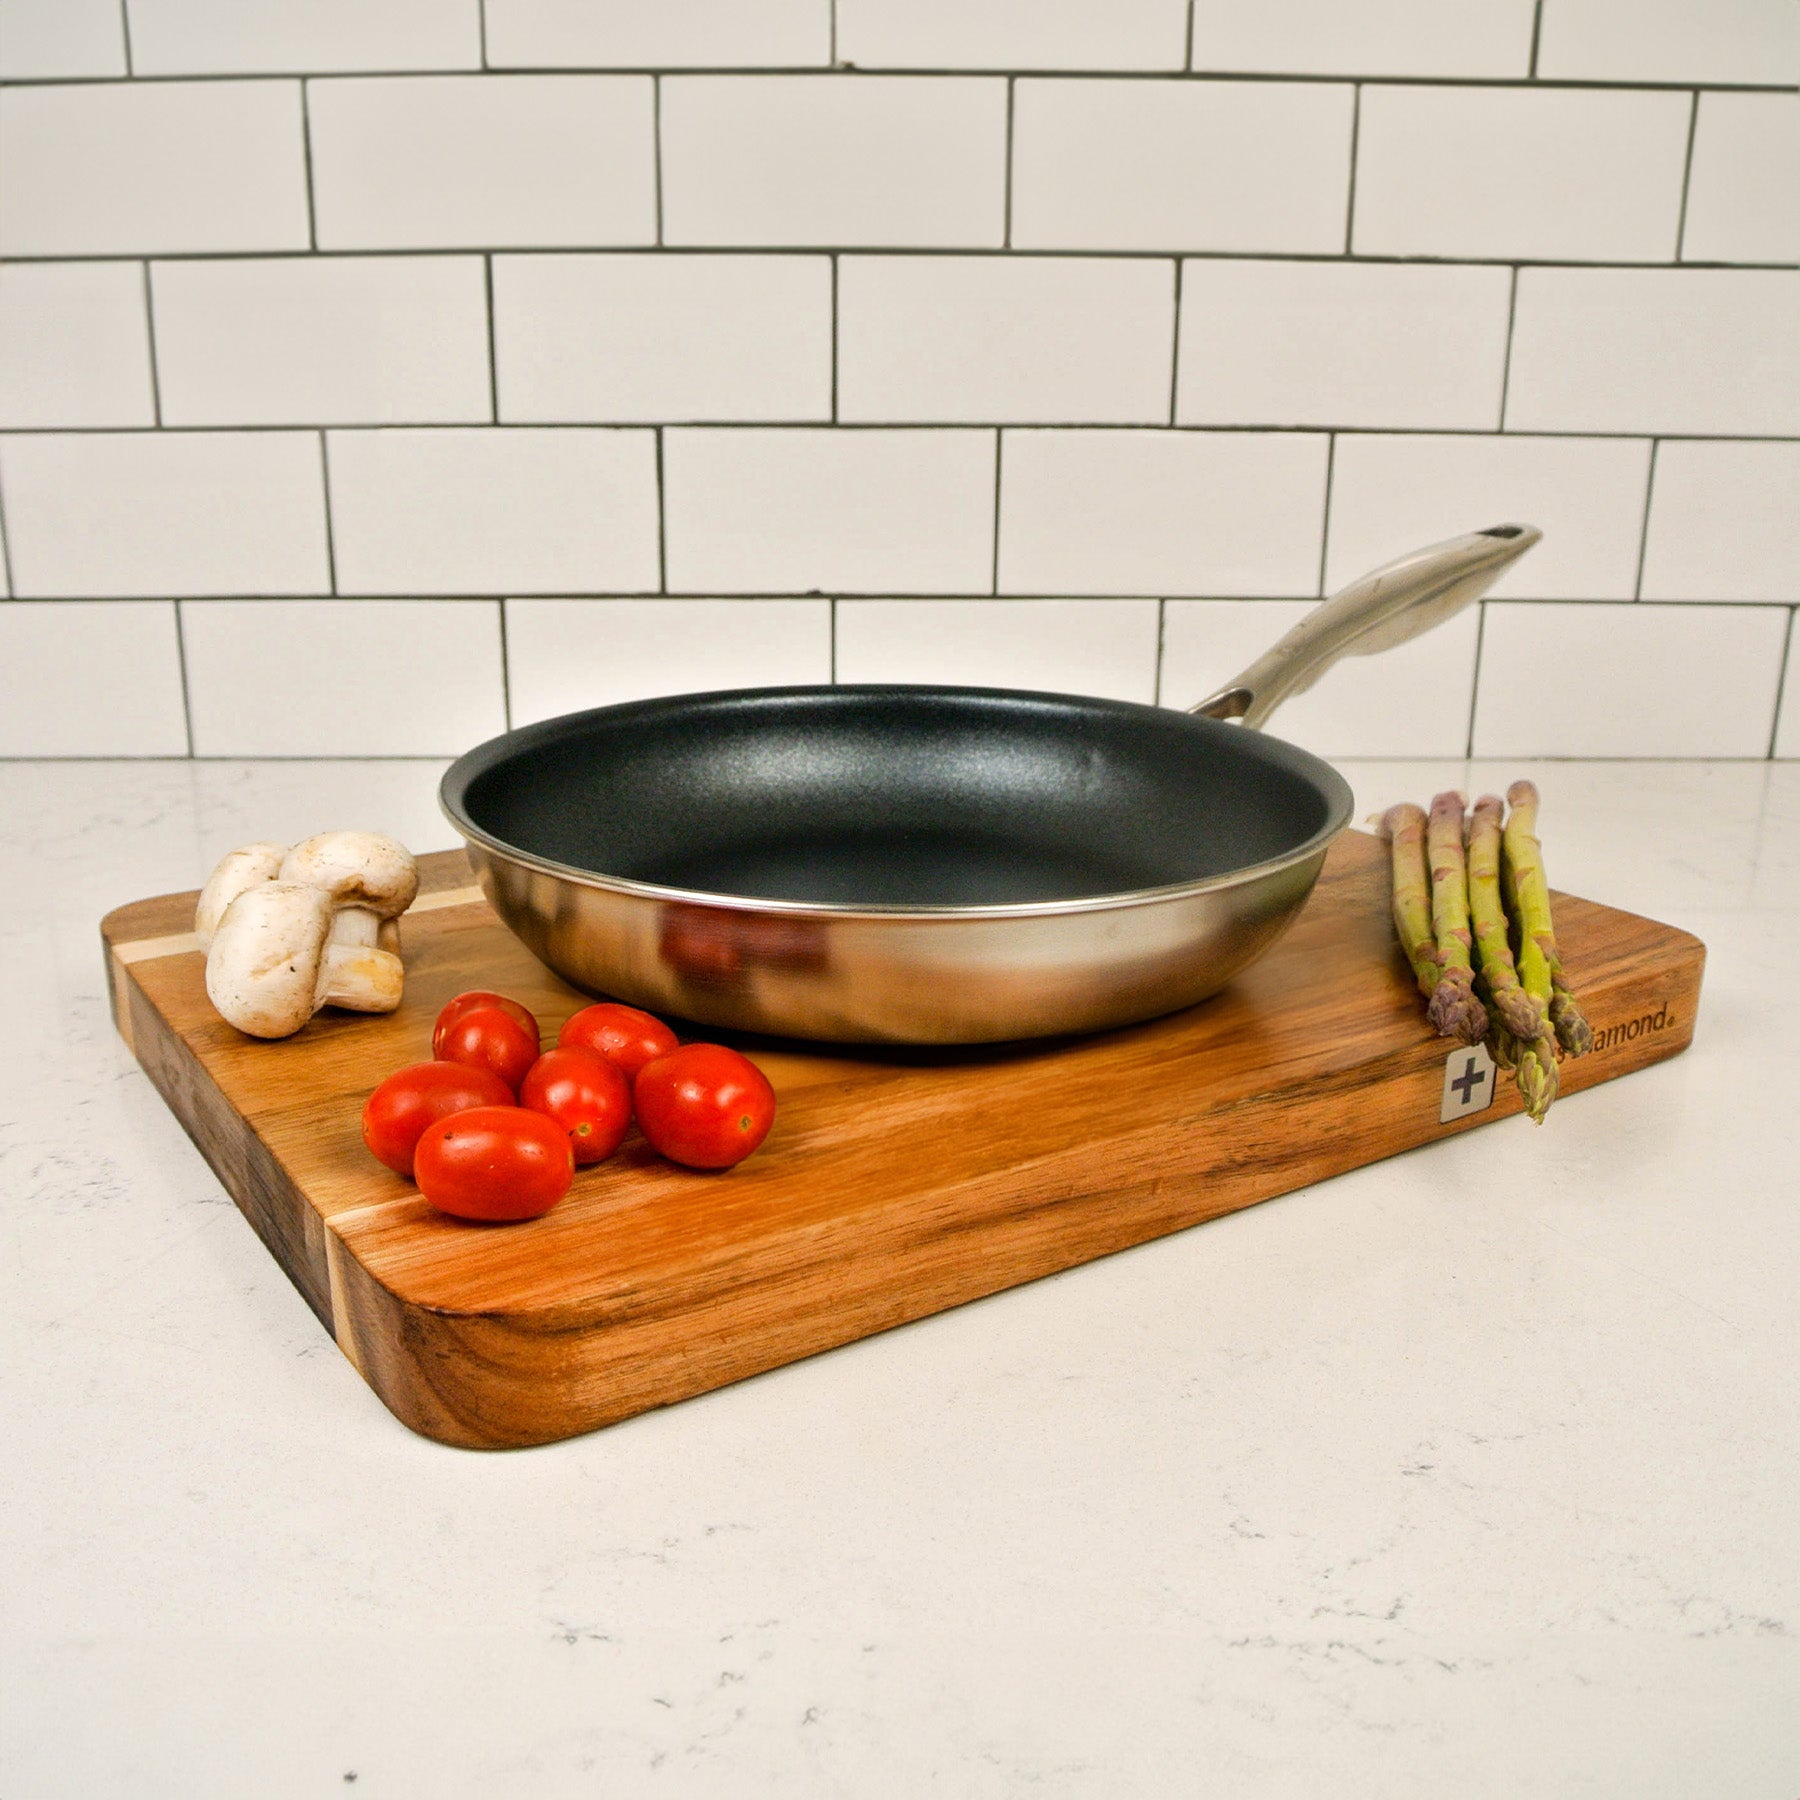 Nonstick Clad Fry Pan - Induction in use on cutting board